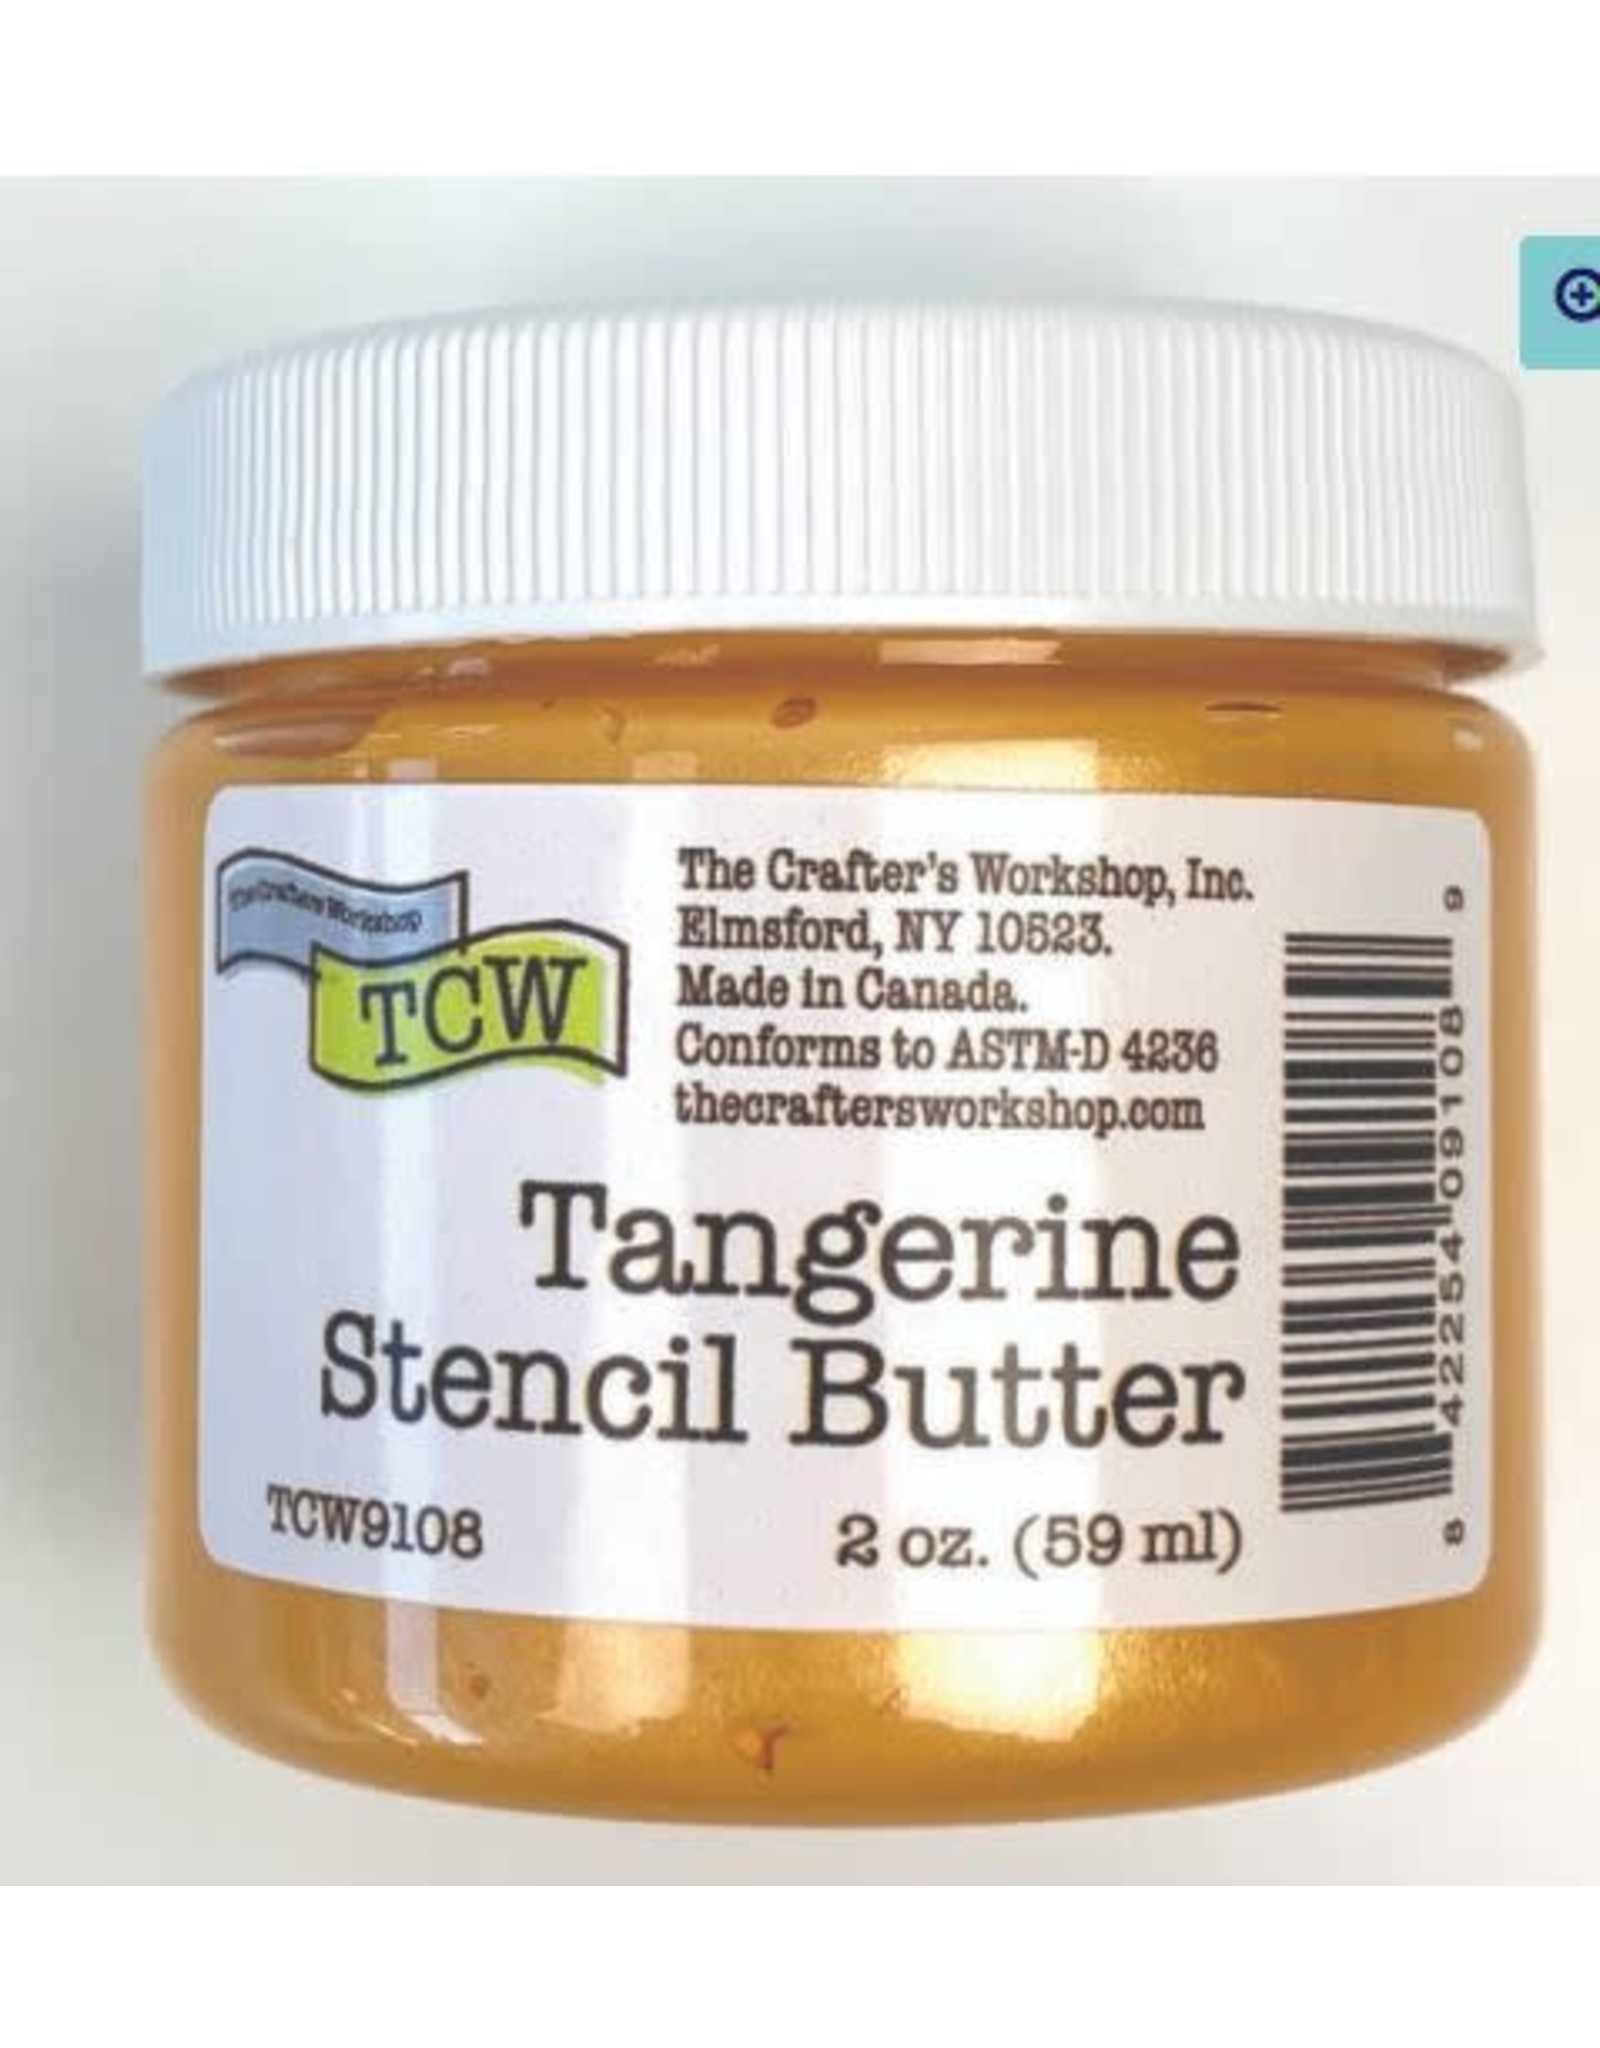 THE CRAFTERS WORKSHOP Stencil Butter 2 oz. - Tangerine